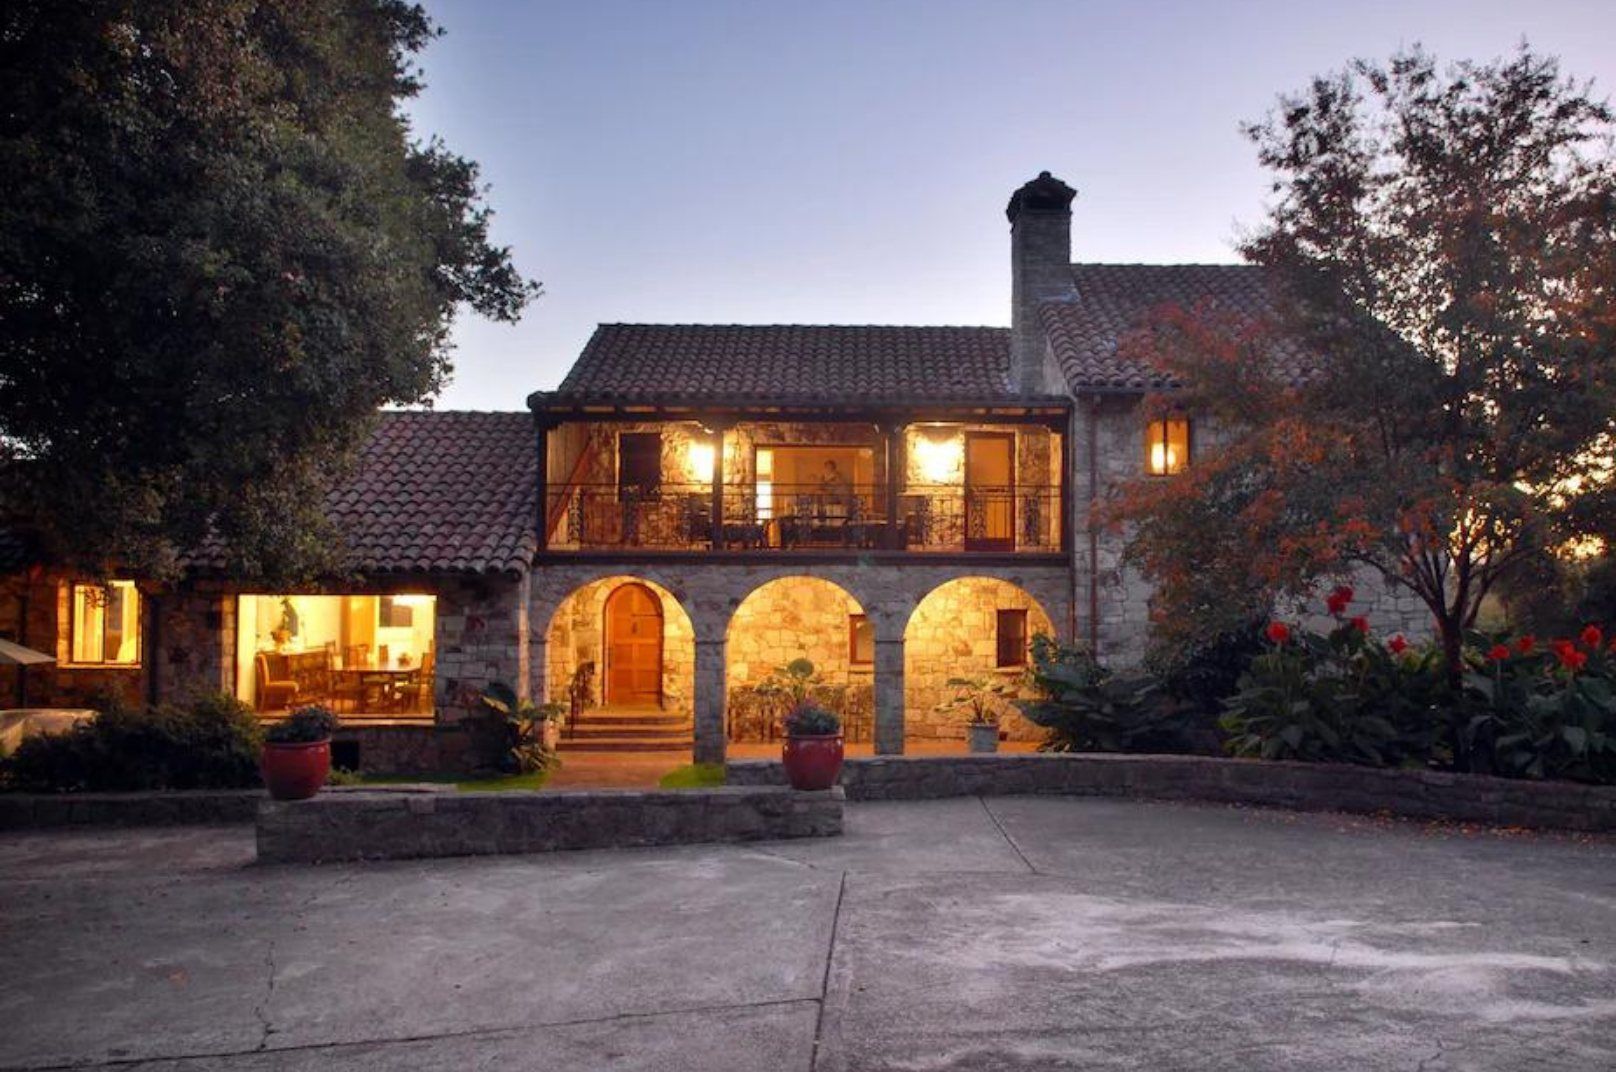 the best Airbnbs in Sonoma, CA